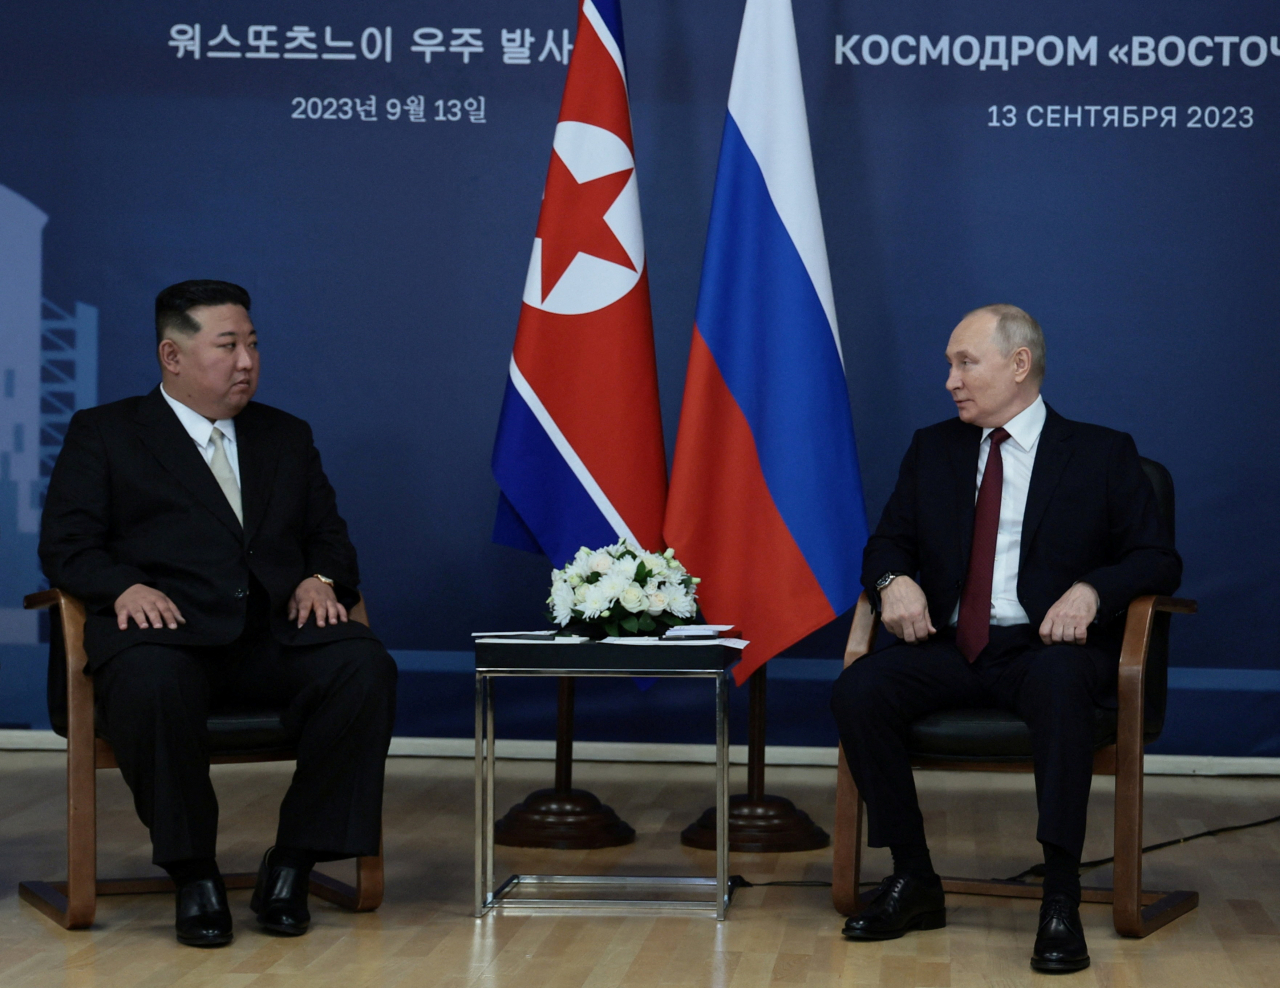 This image on Sept. 14 shows the North's leader Kim Jong-un (left) and Russian President Vladimir Putin holding a summit at Russia's Vostochny spaceport the previous day. (Yonhap)